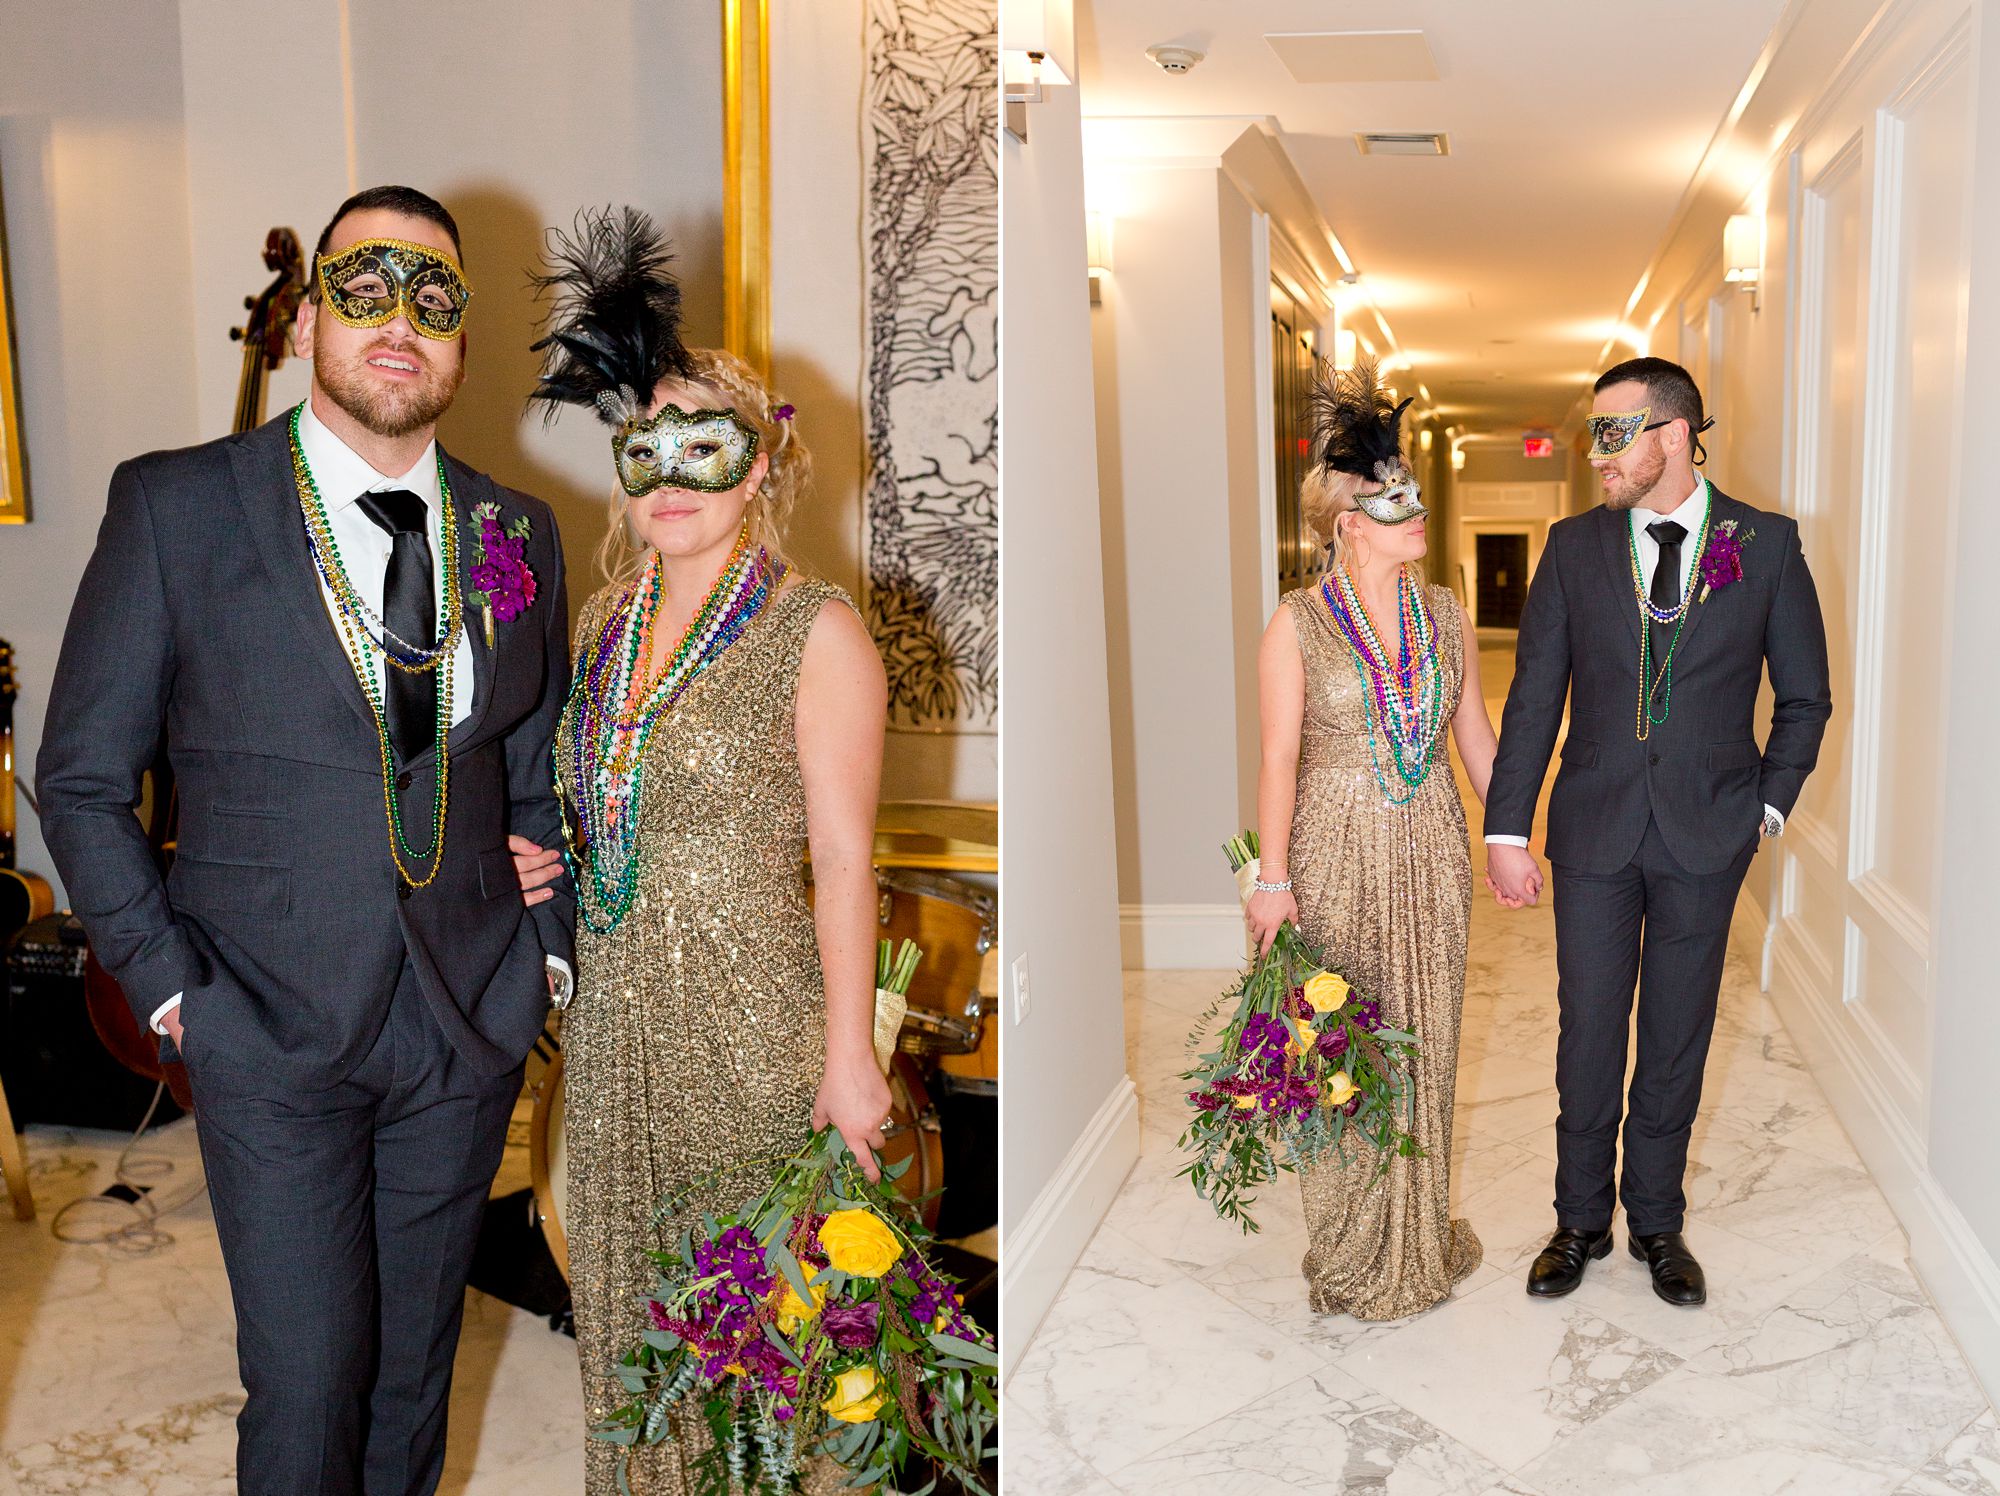 A bride and groom in masquerade masks at the Tremont House in Galveston.